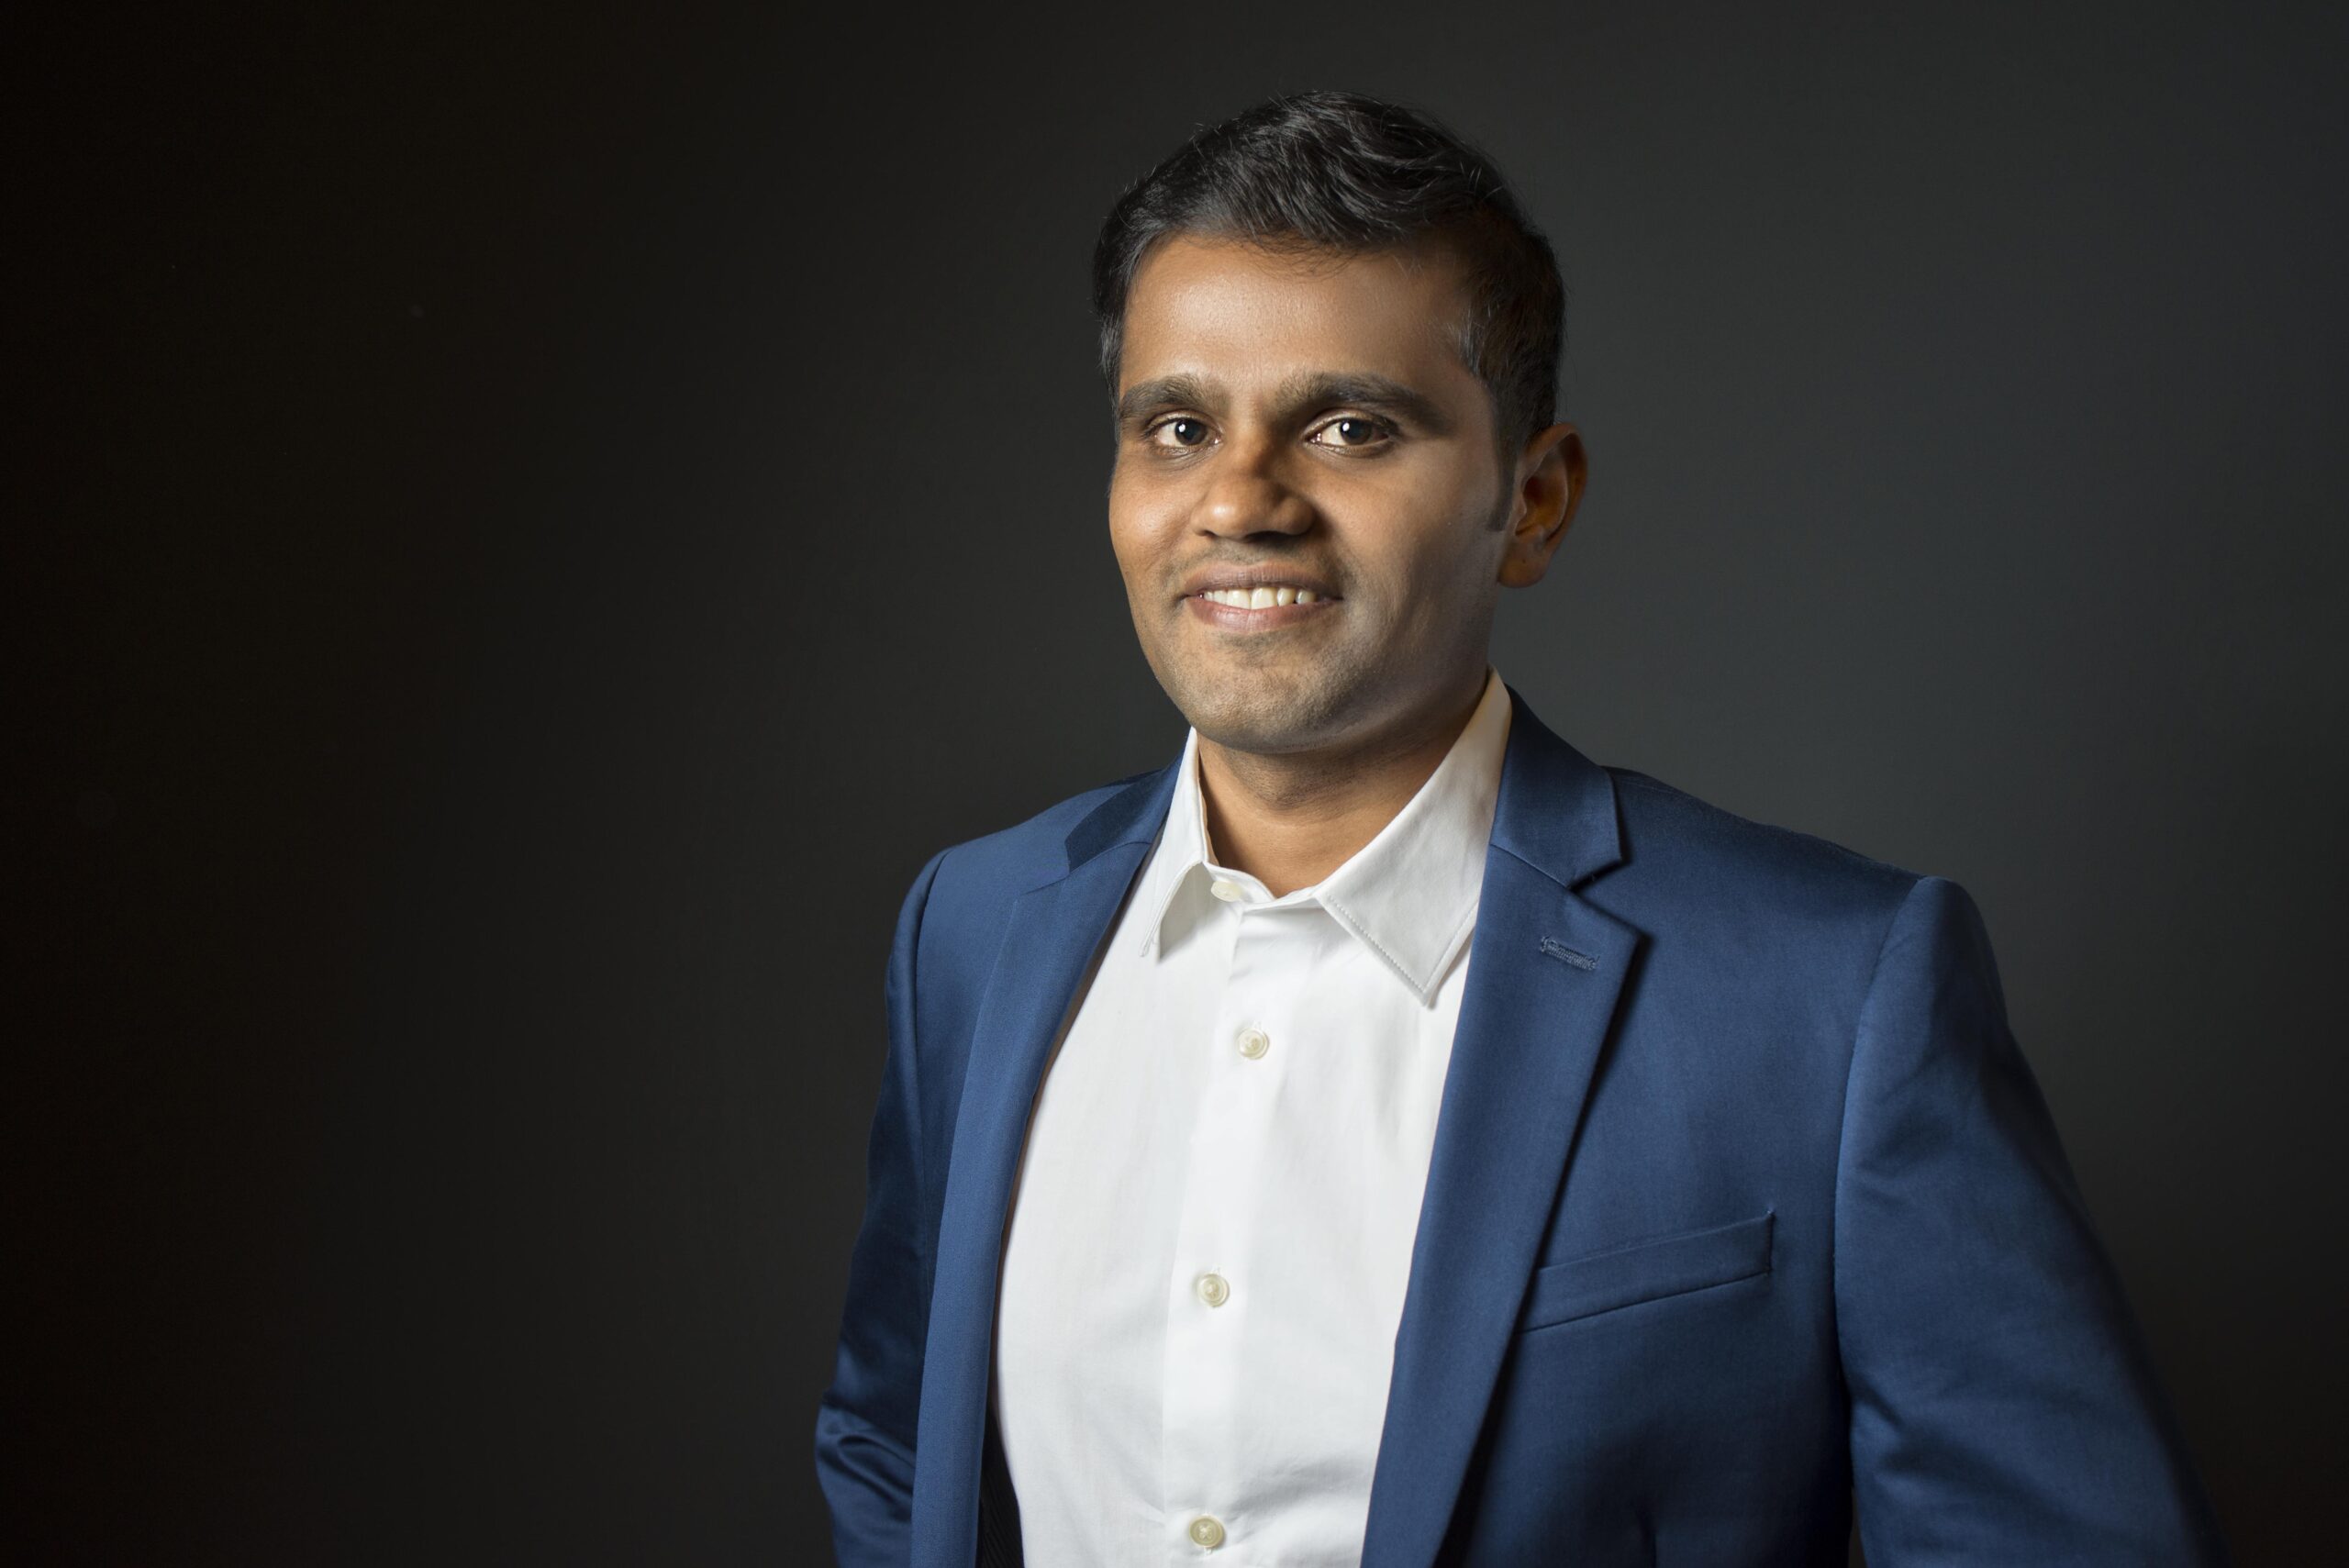 Sunday Interview: Suddan S S, Founder & CEO at HR CUBE & MINTLY